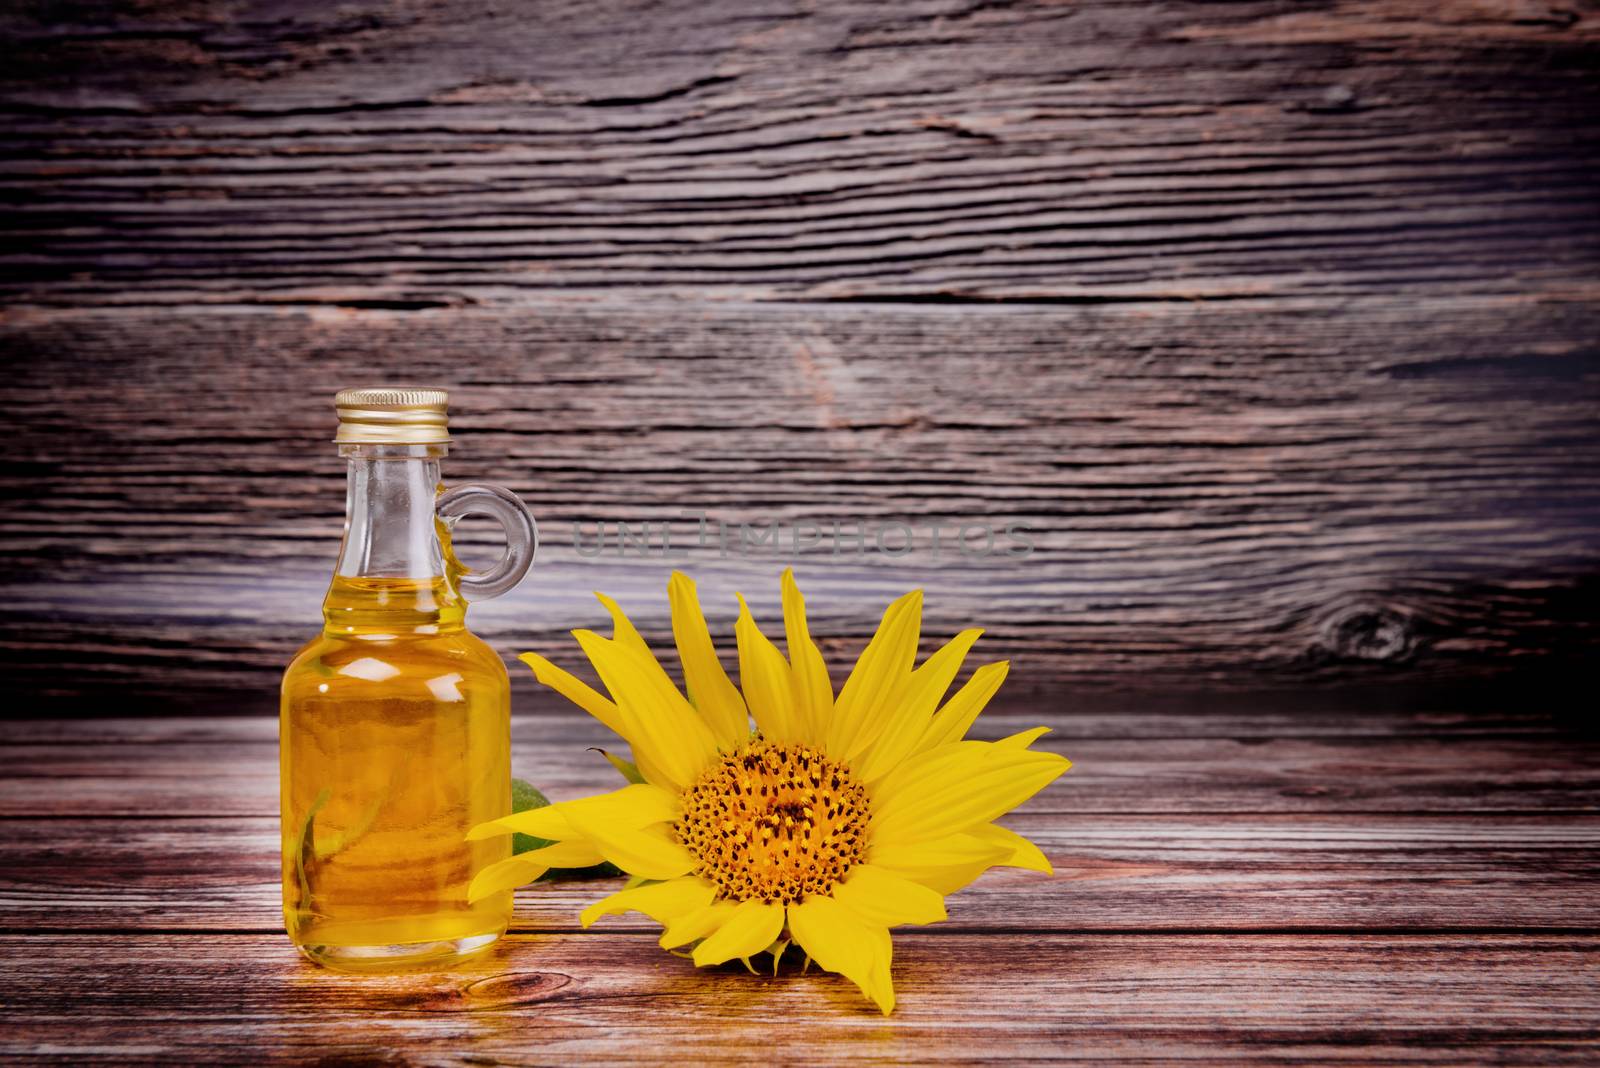 Glass bottle with sunflower oil and flowers on wooden background. Studio shot. by leonik